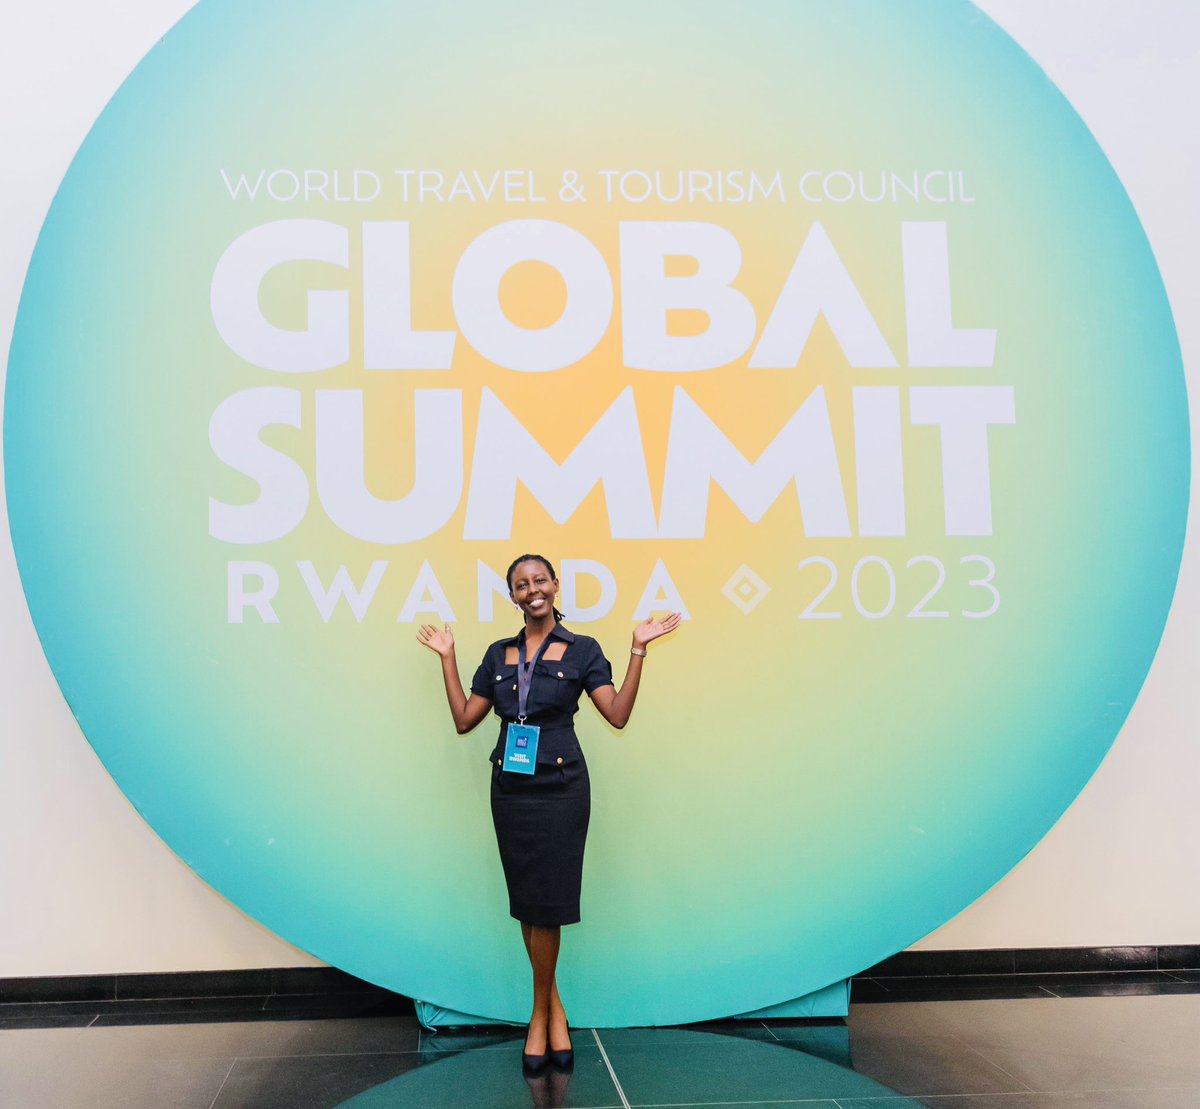 African Travel & Tourism sector could add US$168BN to our continent’s economy and create over 18 million new jobs. 

What a pleasure to witness GoR’s efforts to show the world all that Rwanda has to offer @WTTC 🌍✨

#GSRwanda @visitrwanda_now